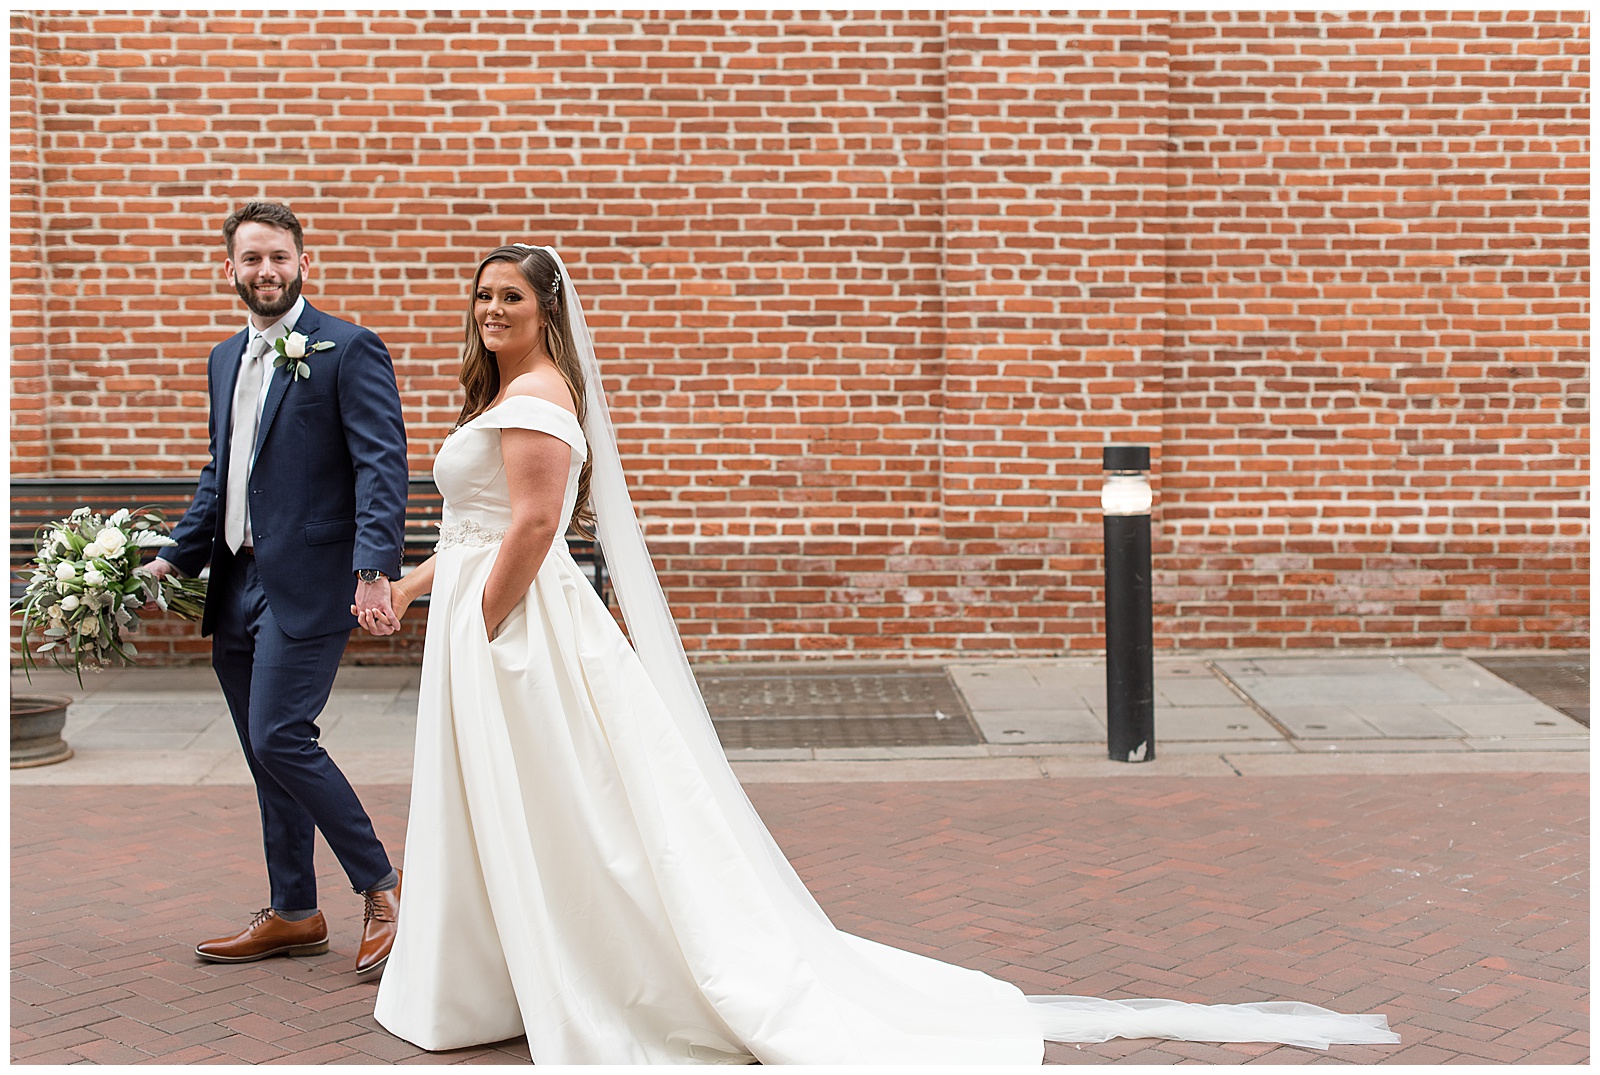 groom holding bride's hand as he leads her walking past camera by brick wall in lancaster pennsylvania